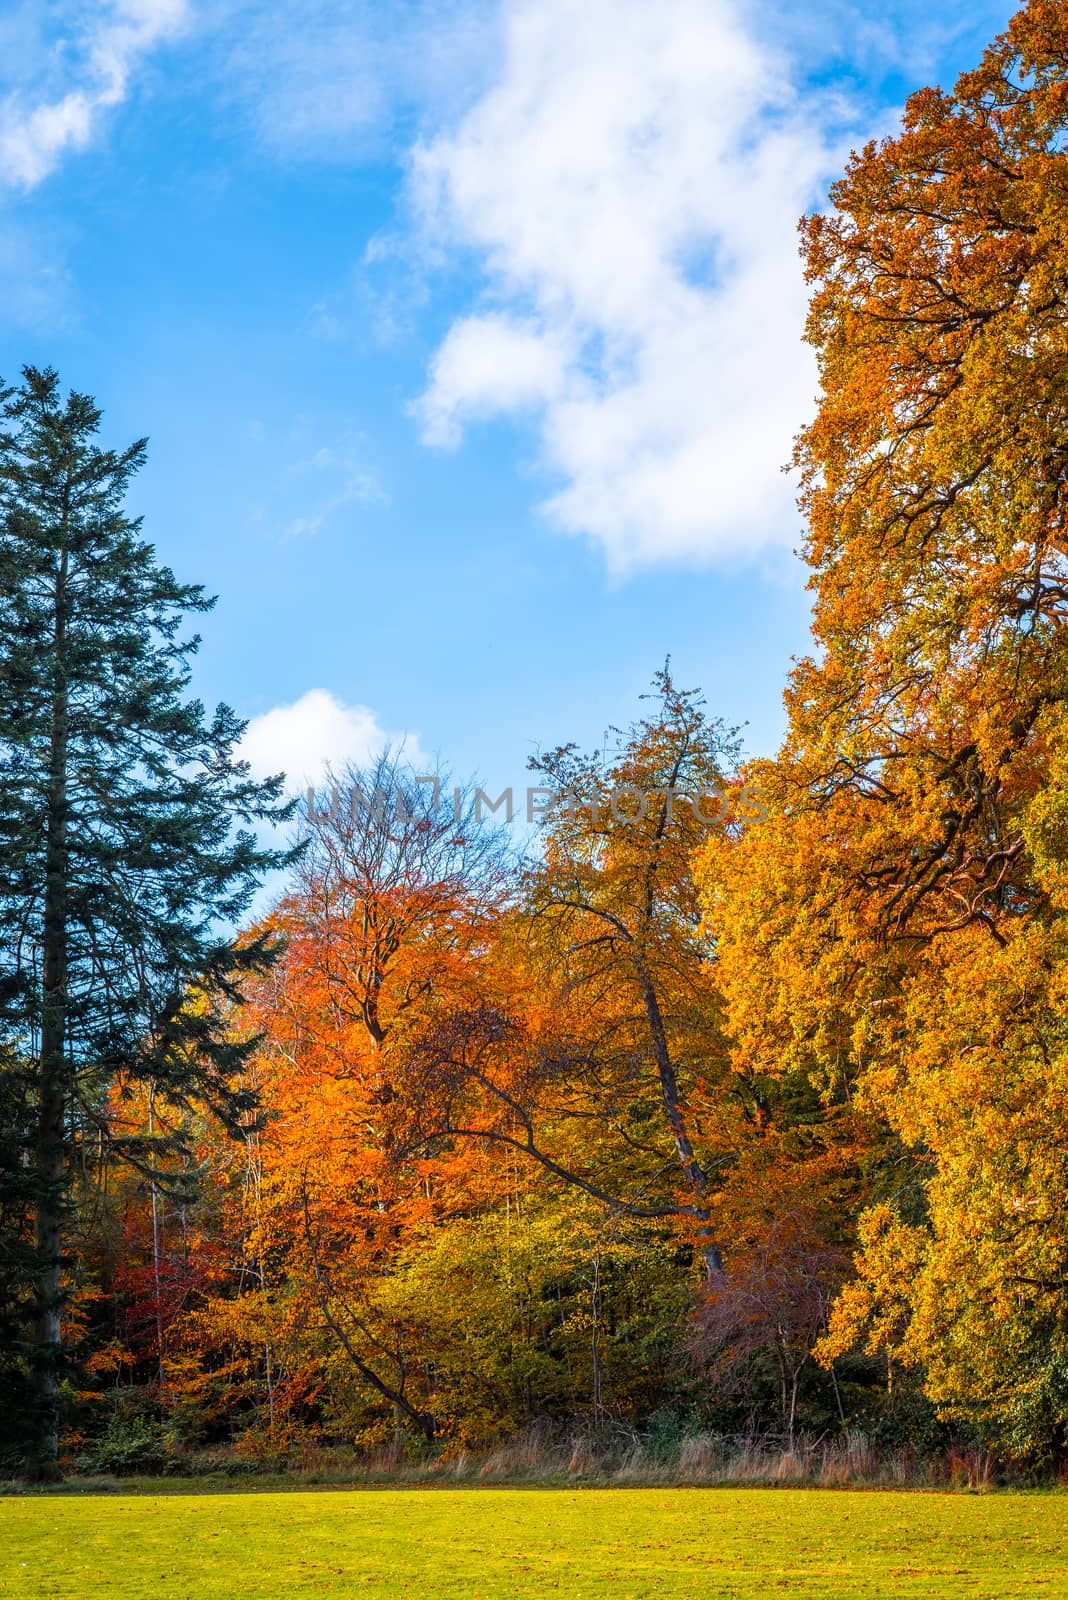 Park with colorful trees in warm colors in the fall